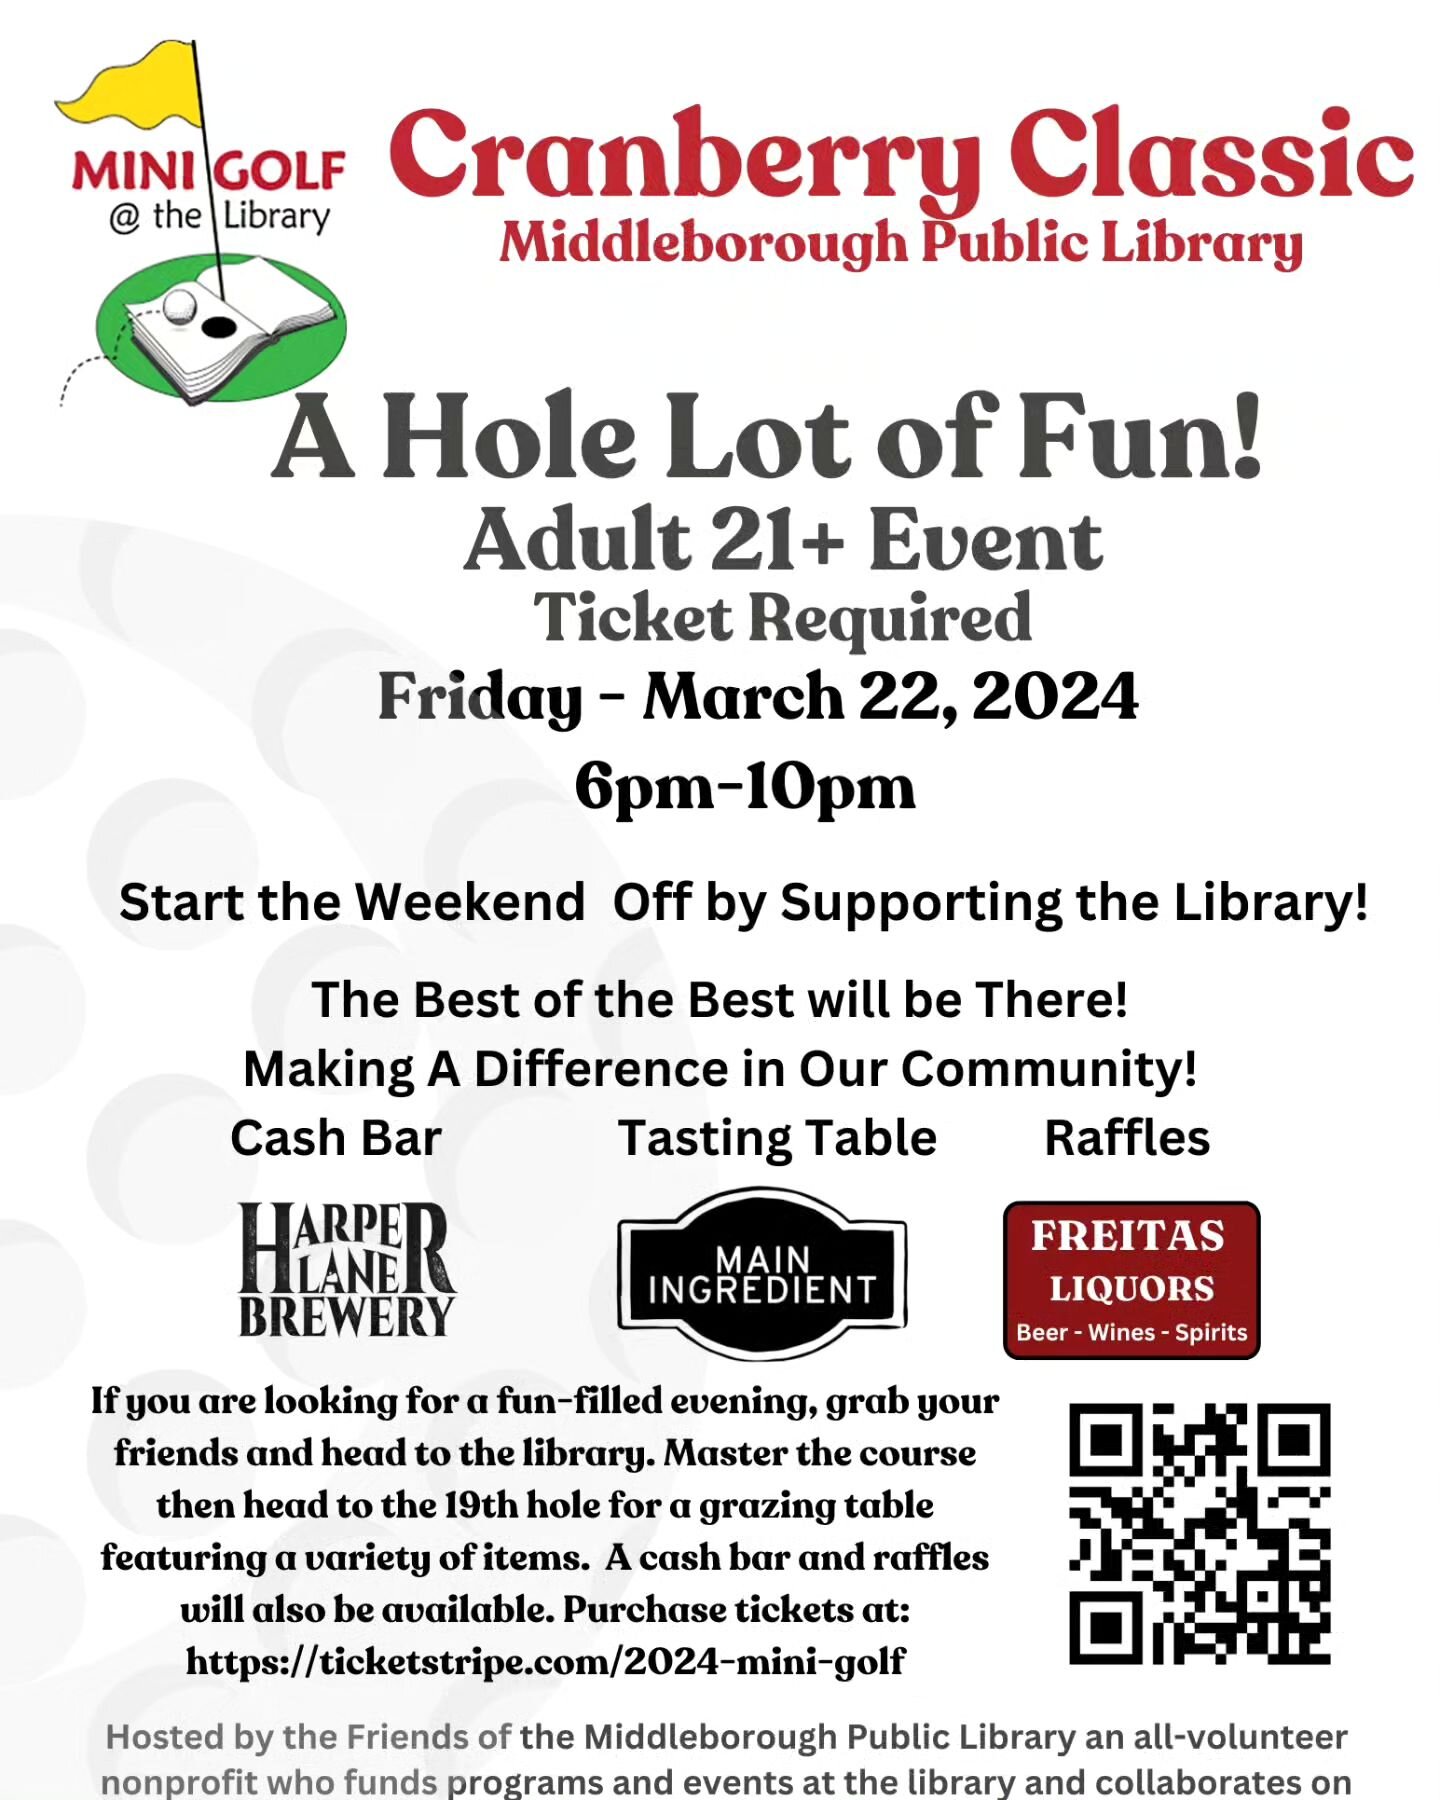 We're pouring tomorrow night at the Middleborough Public Library! Mini Golf at the Library!

 3/22/24 6-10pm. 

Purchase in advance at:  https://ticketstripe.com/2024-mini-golf

Limited tickets Available at the door!
.
.
.
#minigolf #library #beer #g